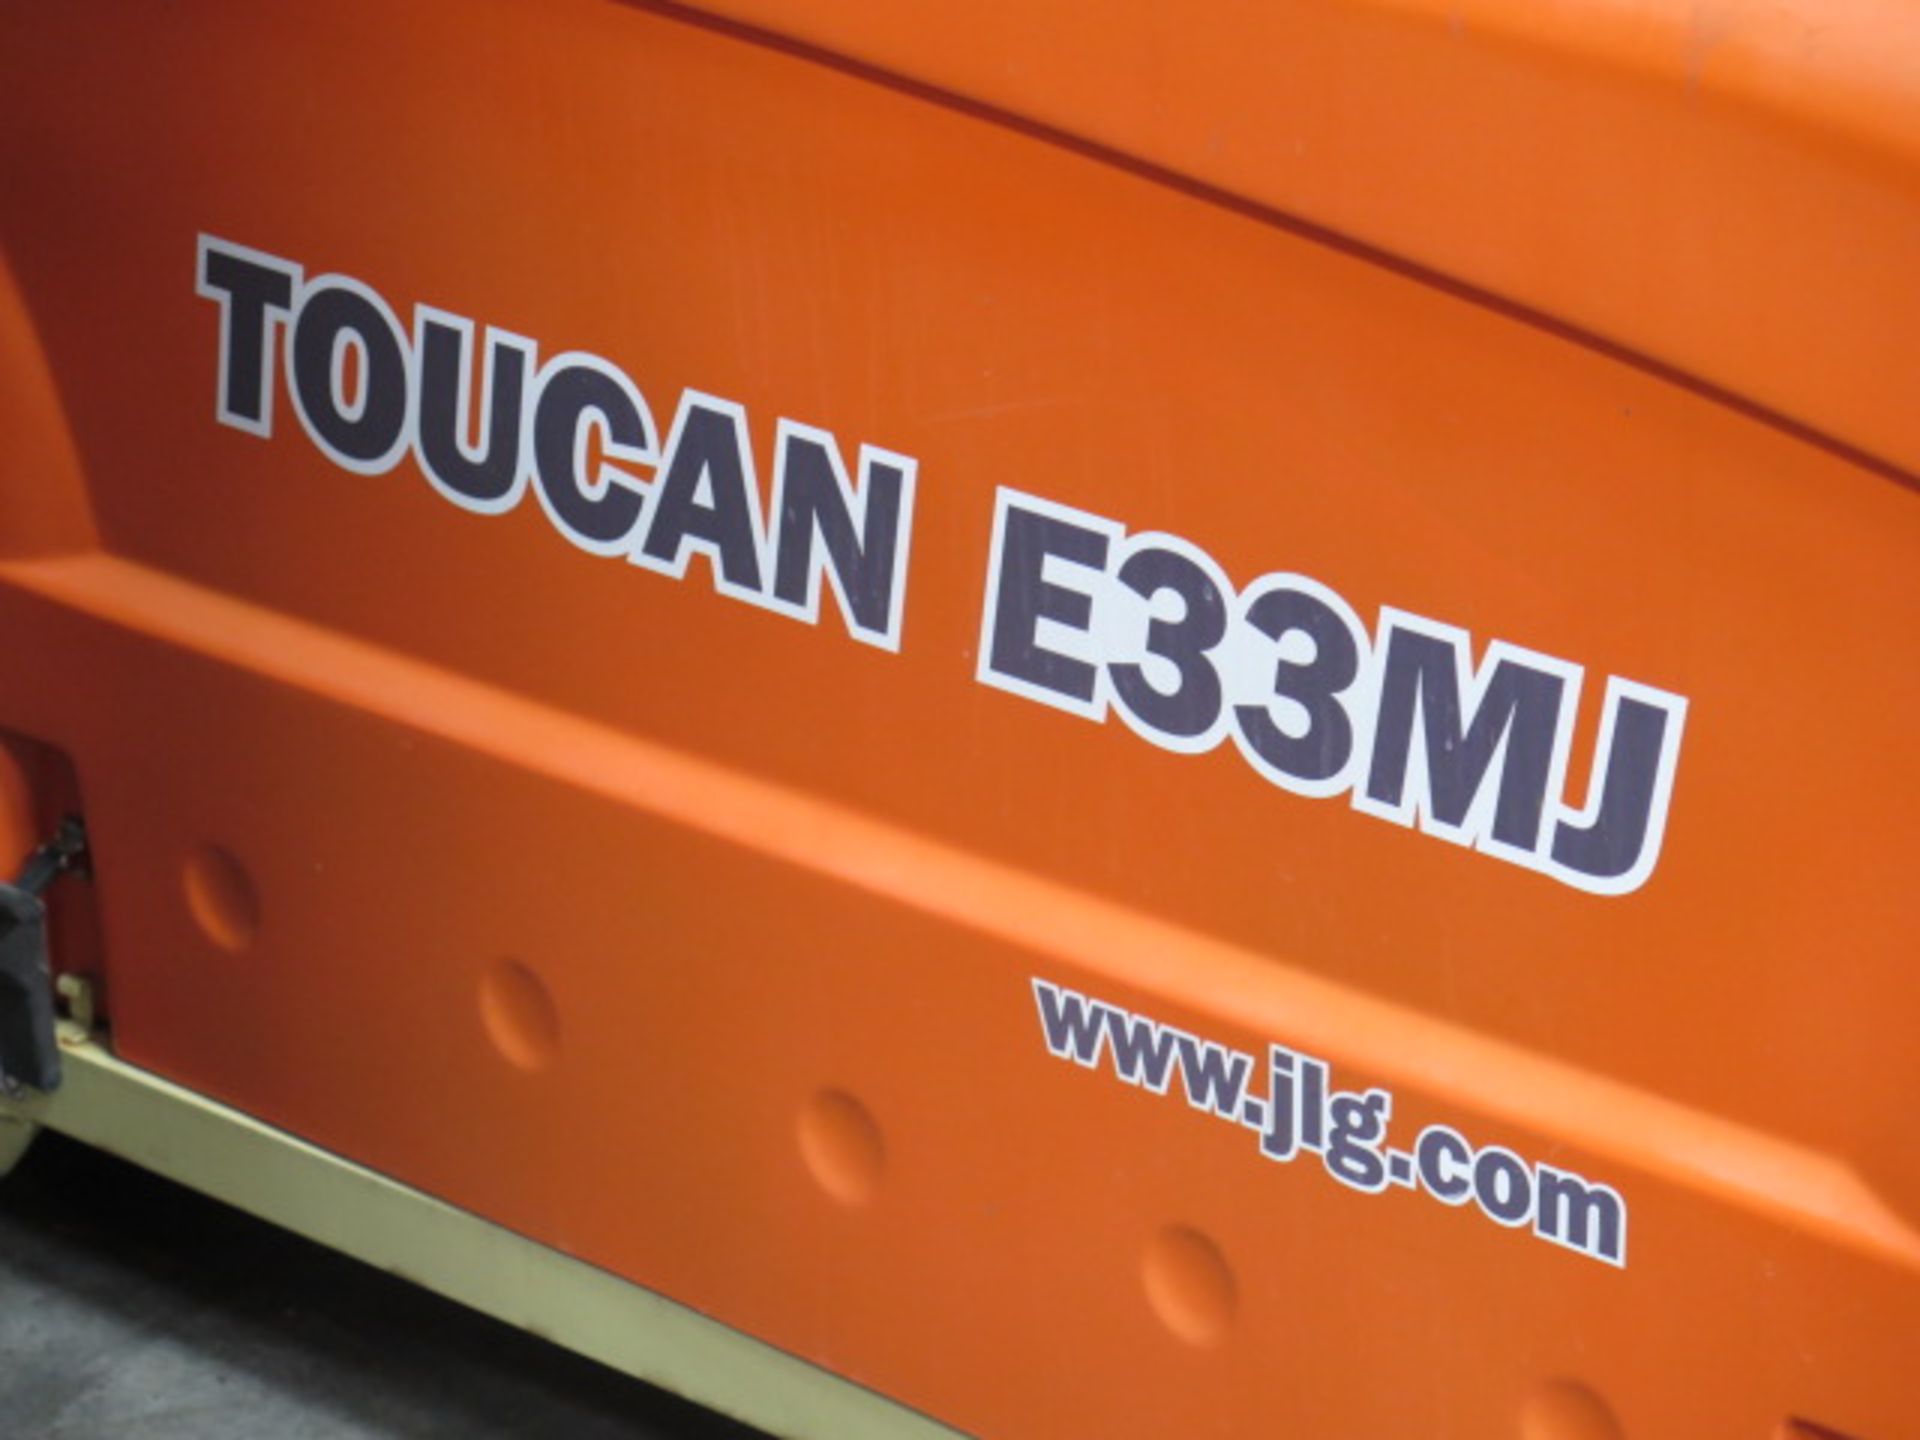 2013 JLG Toucan E33MJ Electric Boom Lift s/n A300052335 w/ 32.75' Max Platform Height, SOLD AS IS - Image 3 of 19